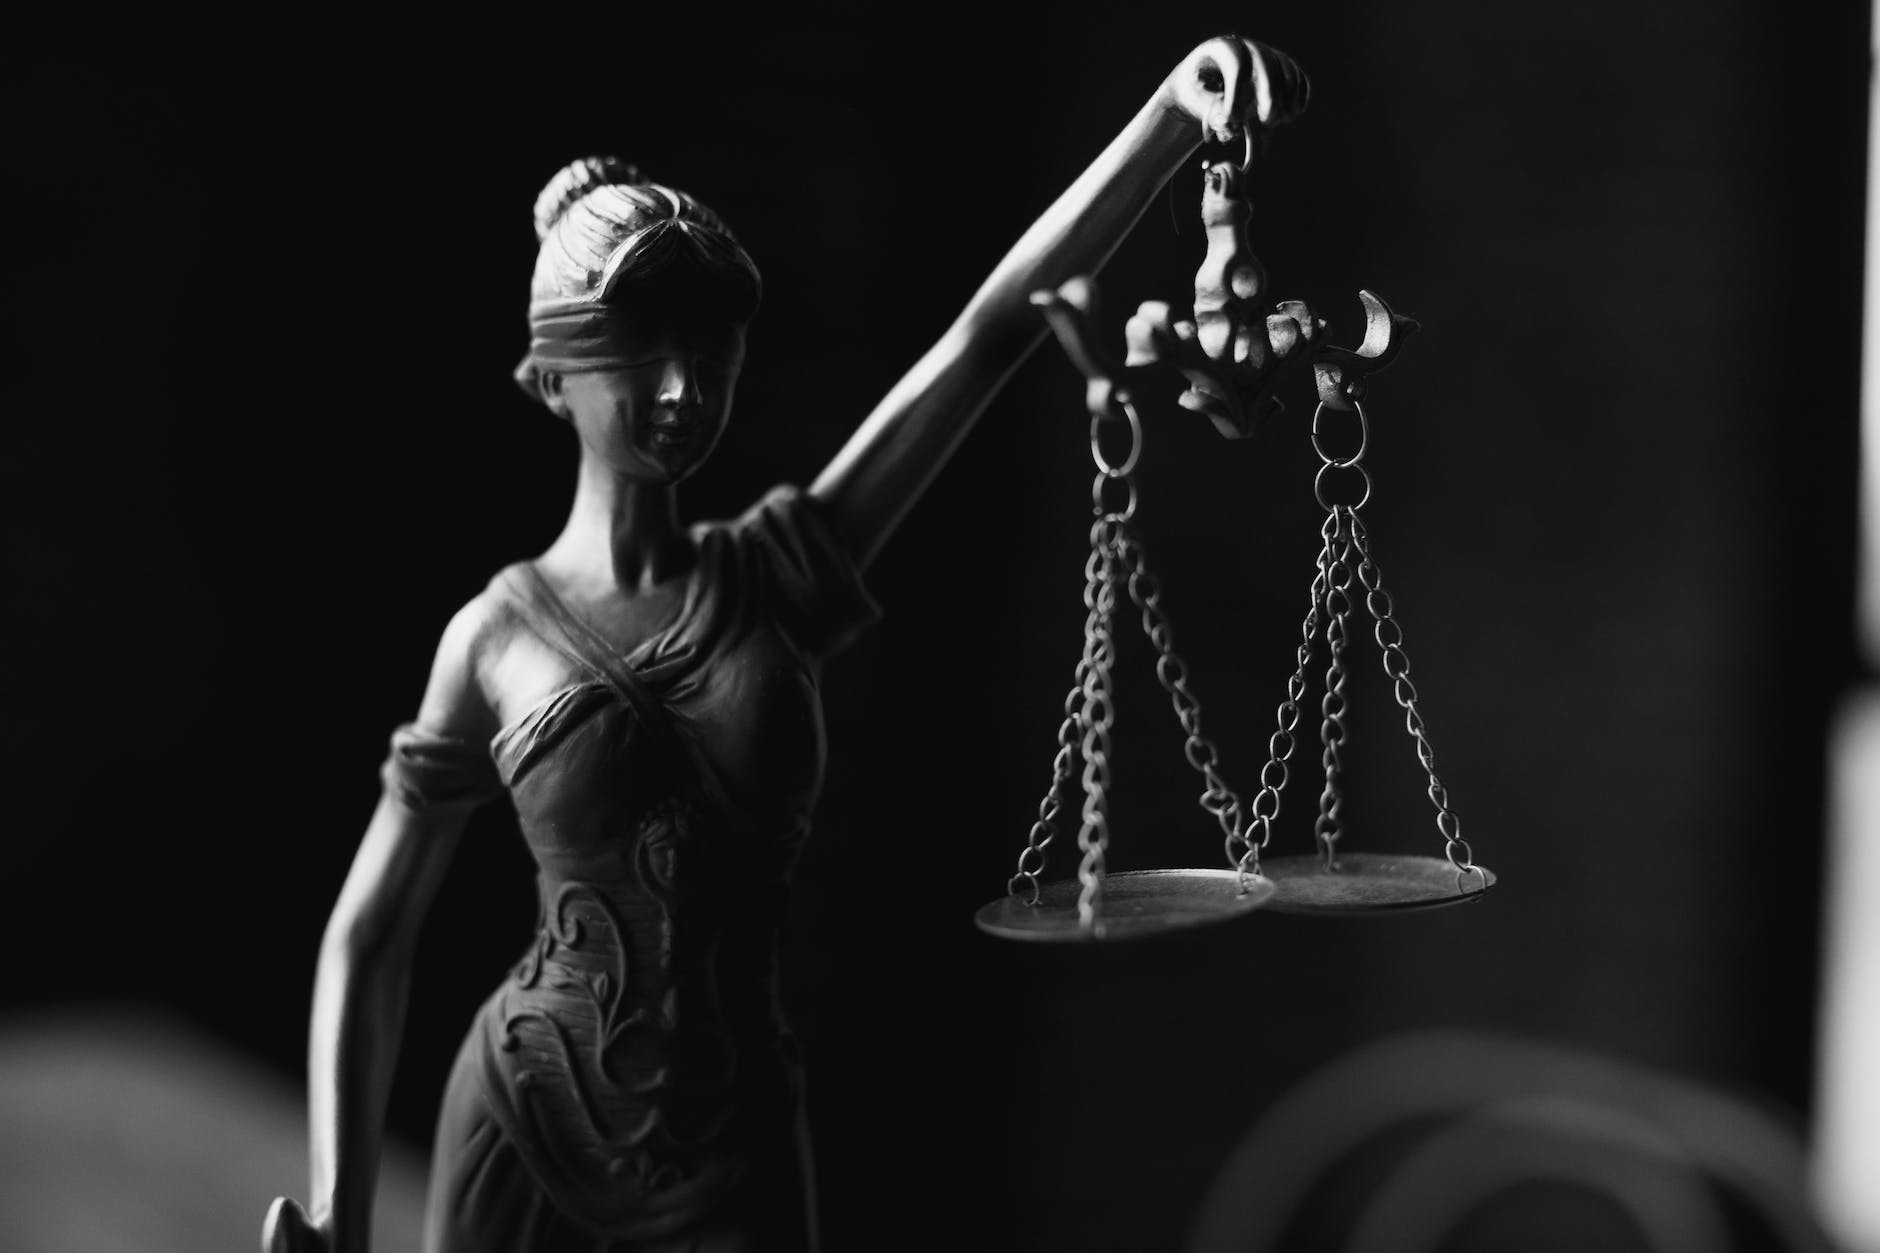 a grayscale of a lady justice figurine

What does it mean to be fair?